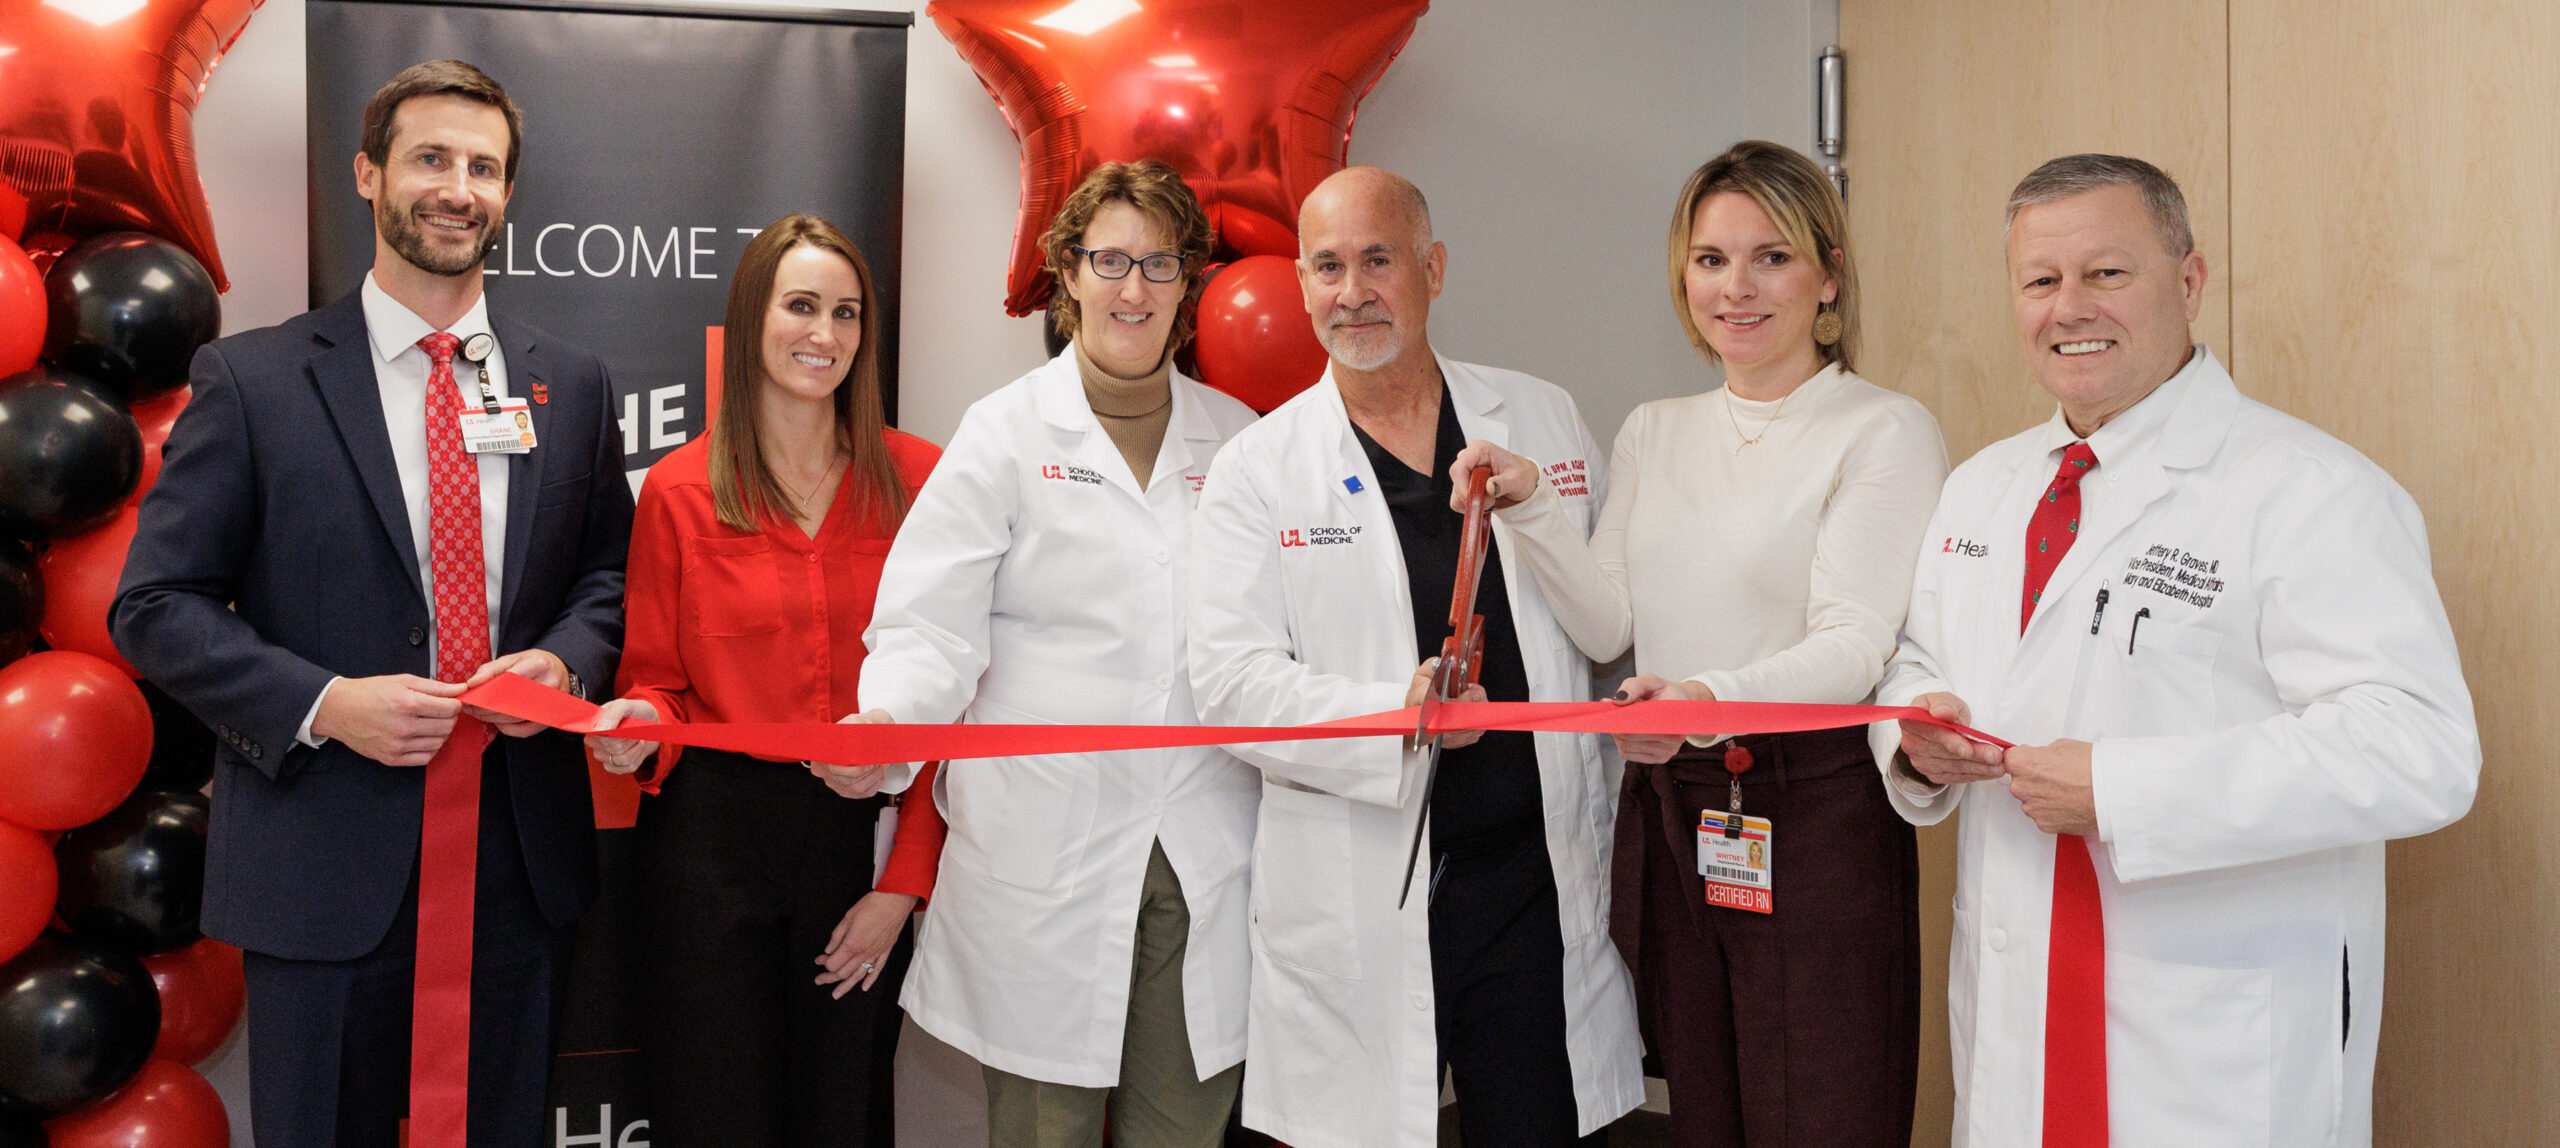 Ribbon cutting ceremony for the Wound Care and Hyperbaric Medicine Center at Mary & Elizabeth Hospital.